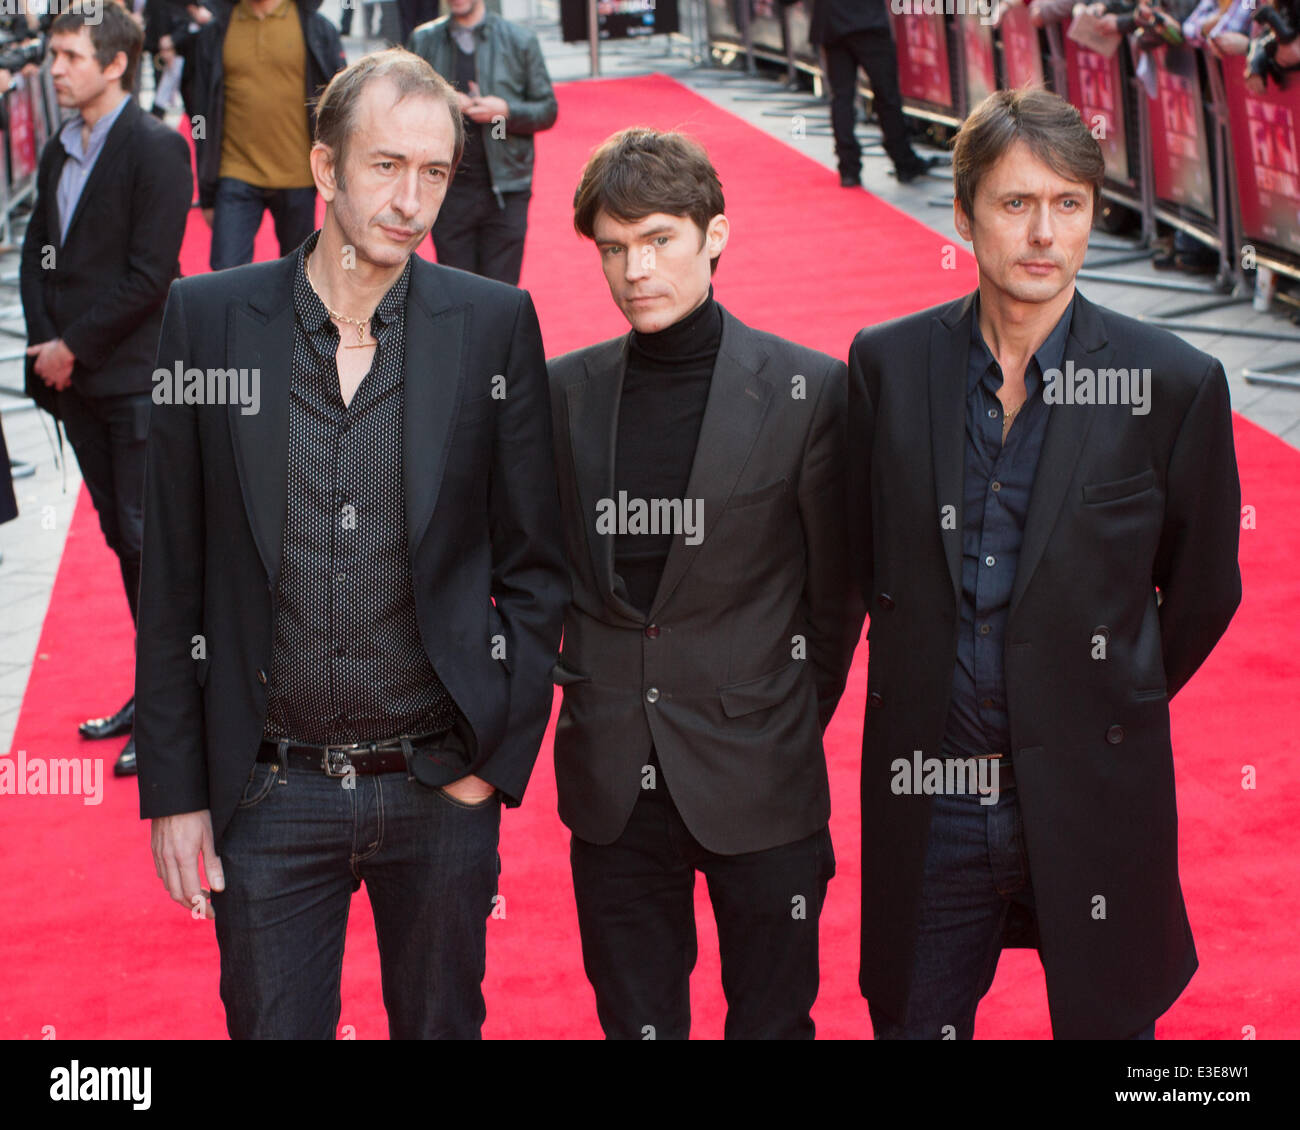 Suede band members, Mat Osman , Neil Codling and Brett Anderson attend the  BFI London Film Festival Screening of "So Young" at the Odeon Leicester  Square Featuring: Mat Osman,Neil Codling,Brett Anderson Where: